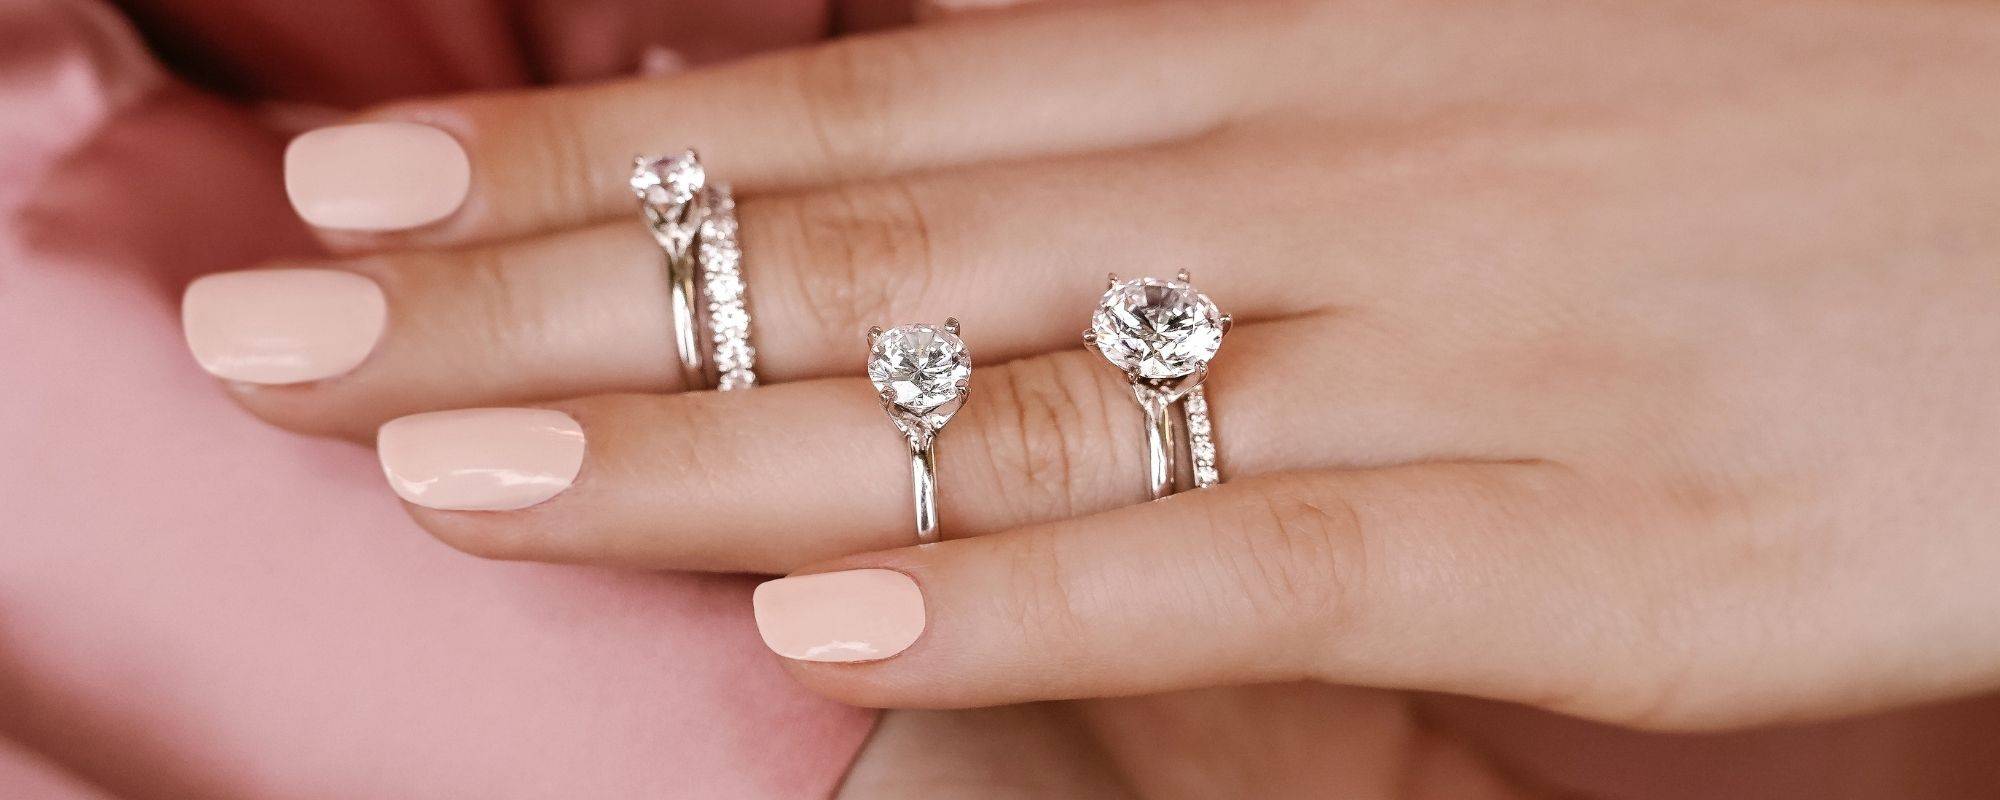 How to Tell a Real Diamond From a Fake: A Guide | Who What Wear